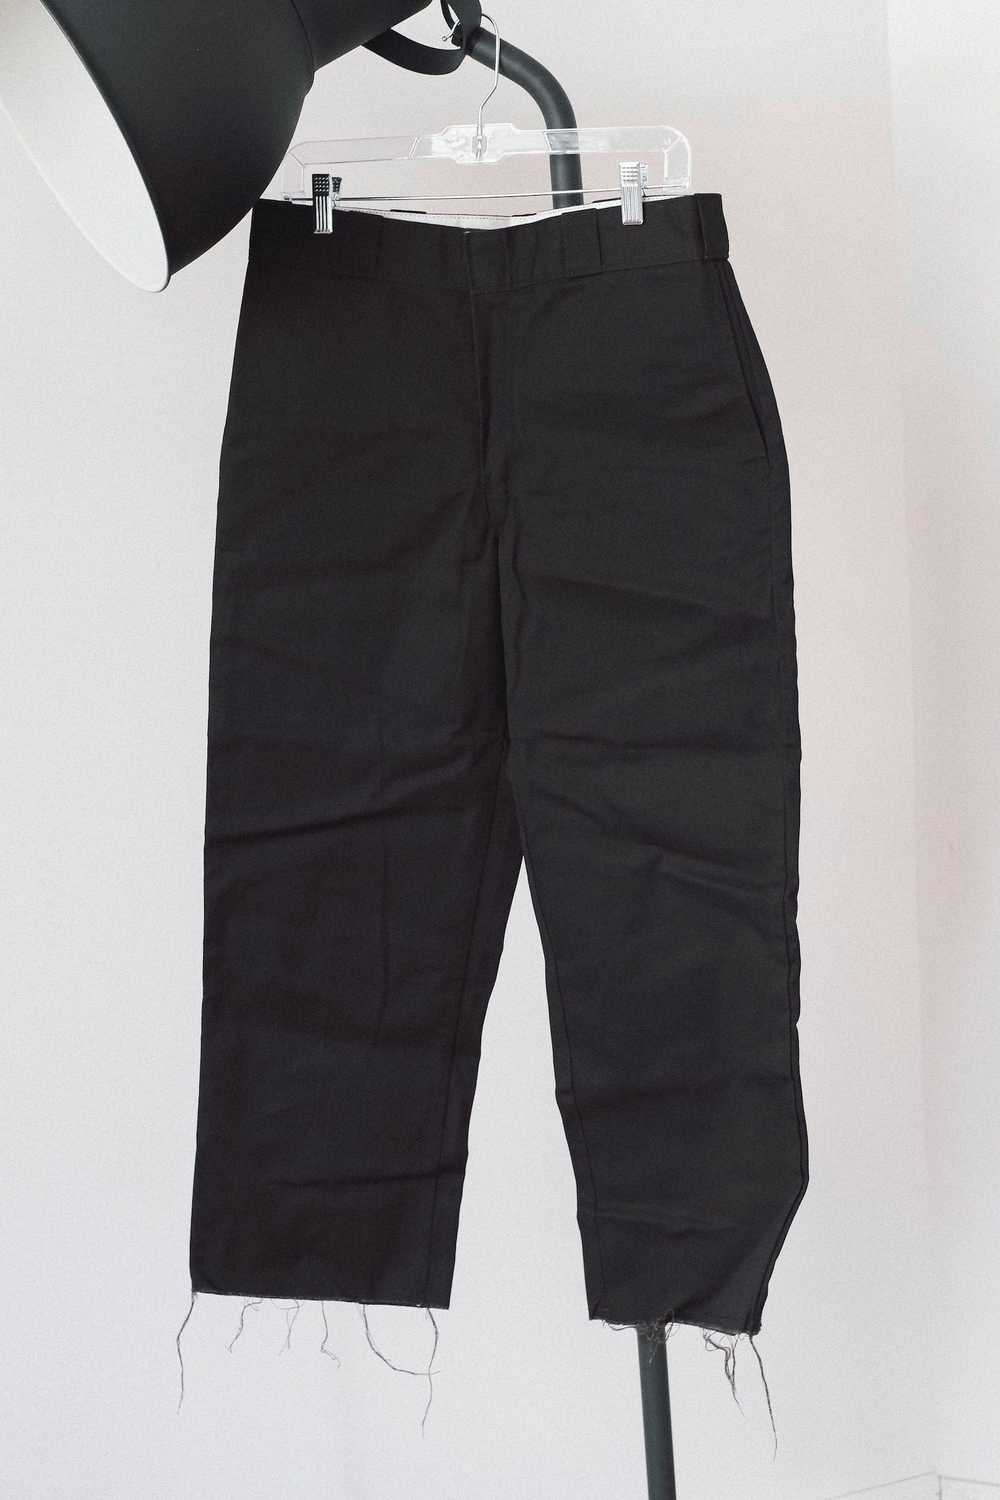 Dickies × Urban Outfitters Canvas Pants by Dickie… - image 2